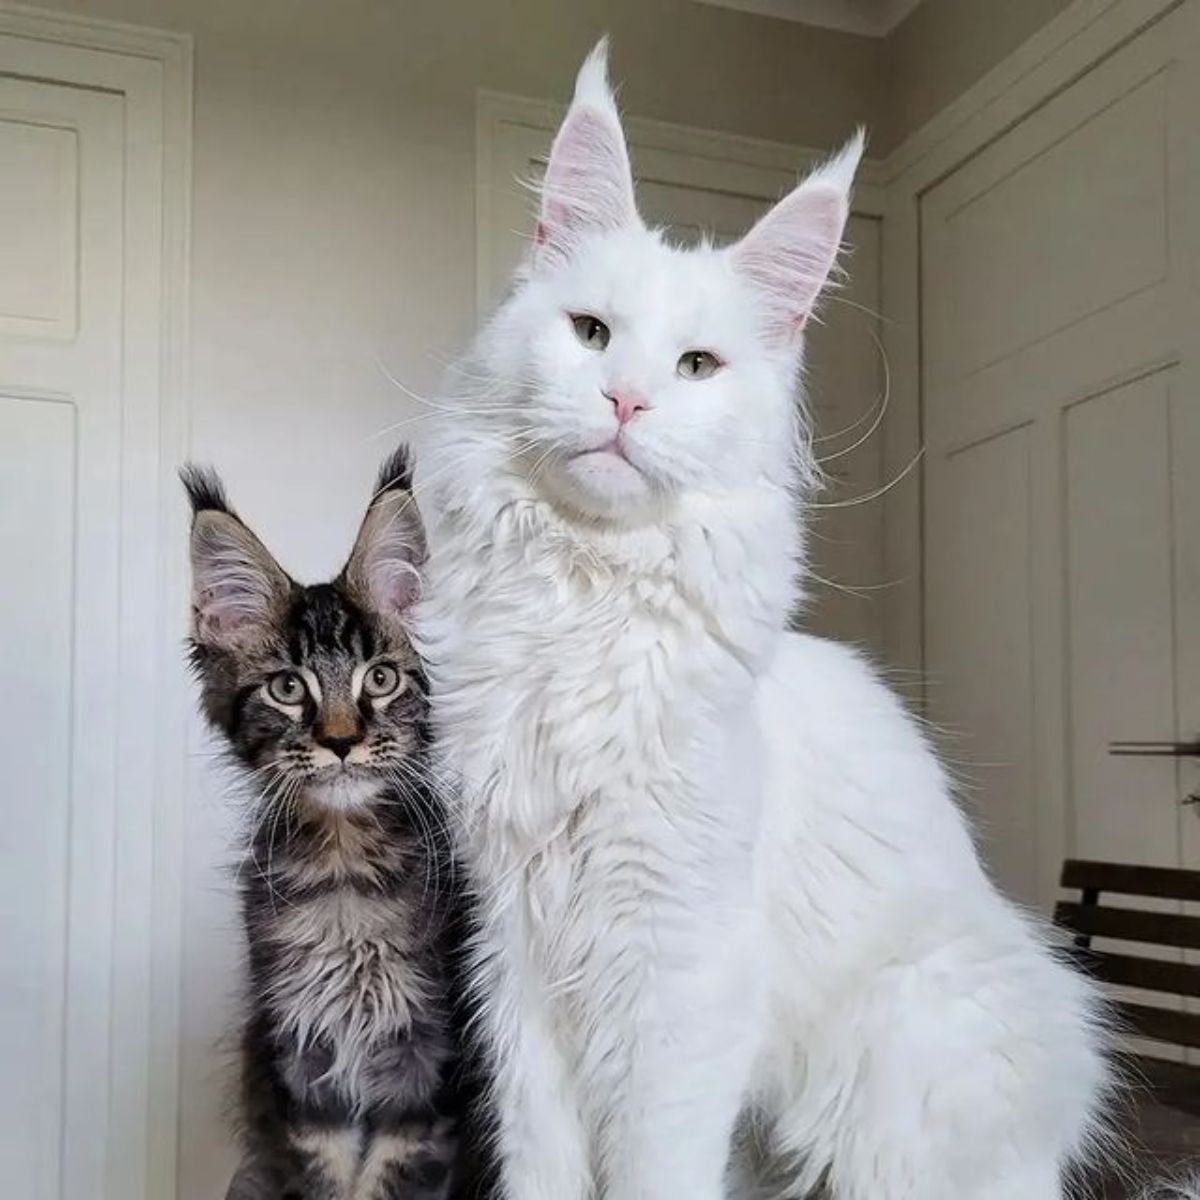 A big tall white maine coon standing next to a smaller cat.